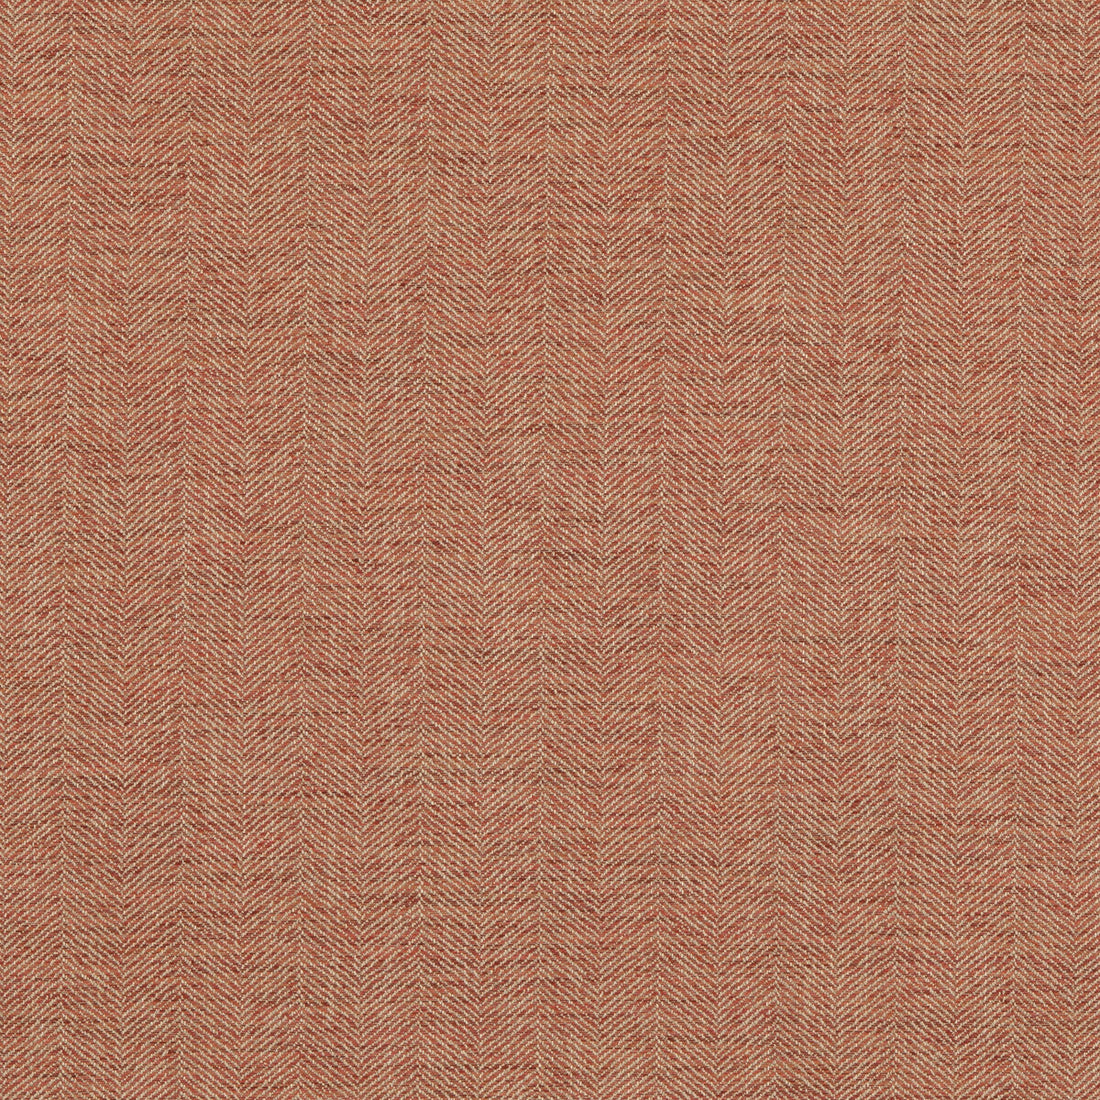 Grand Canyon fabric in spice color - pattern BF10878.330.0 - by G P &amp; J Baker in the Essential Colours II collection